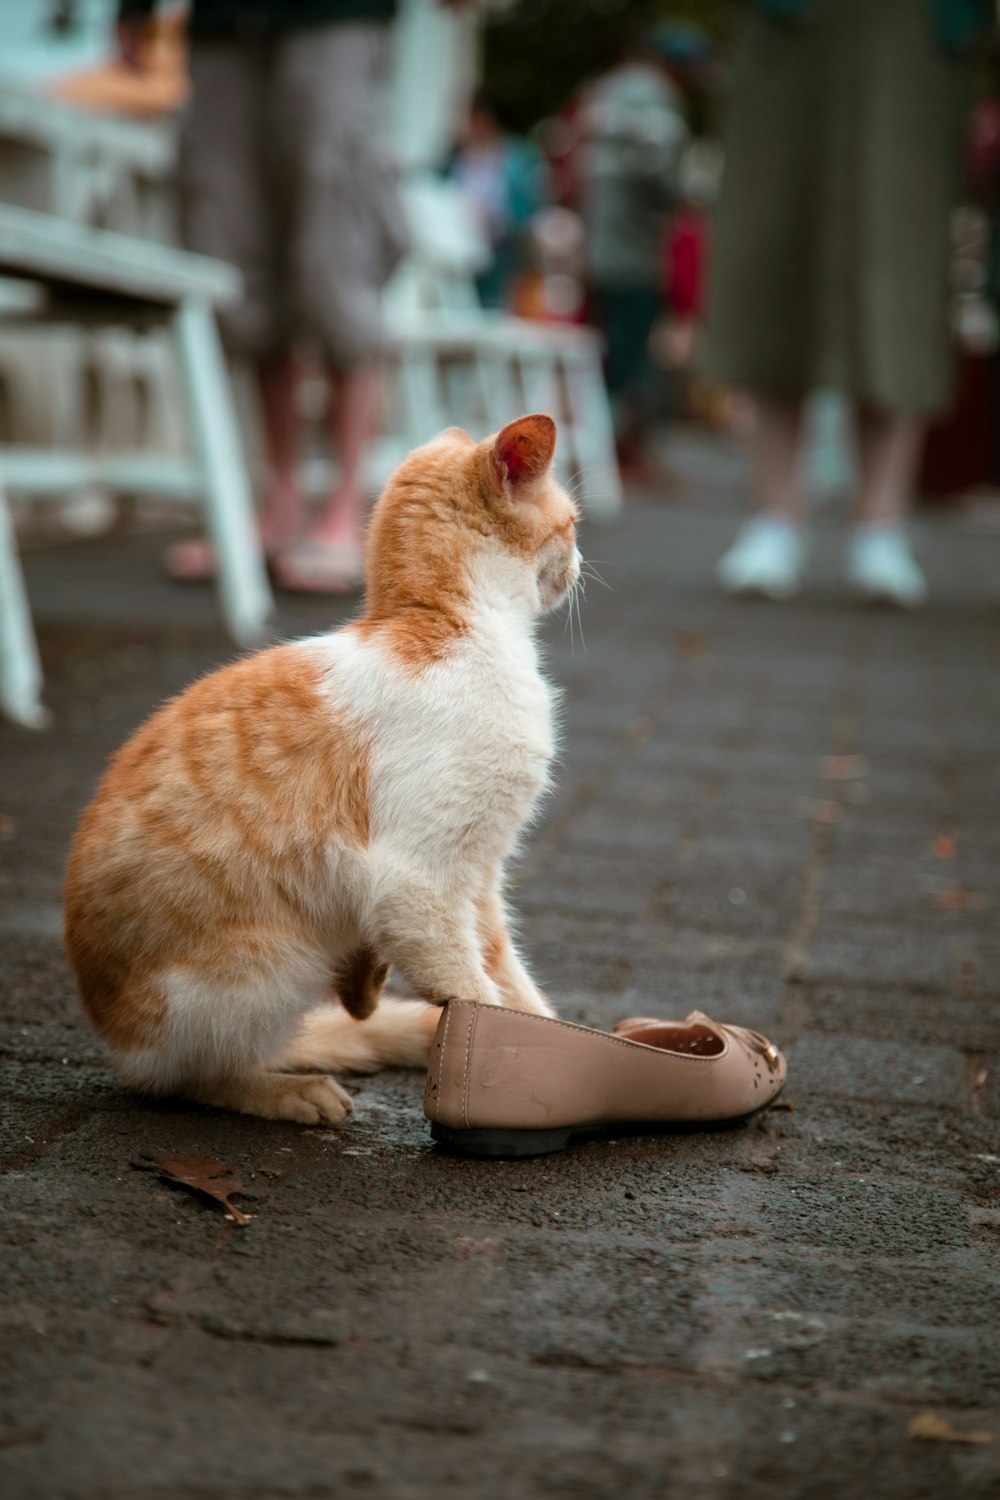 a cat sitting on a shoe